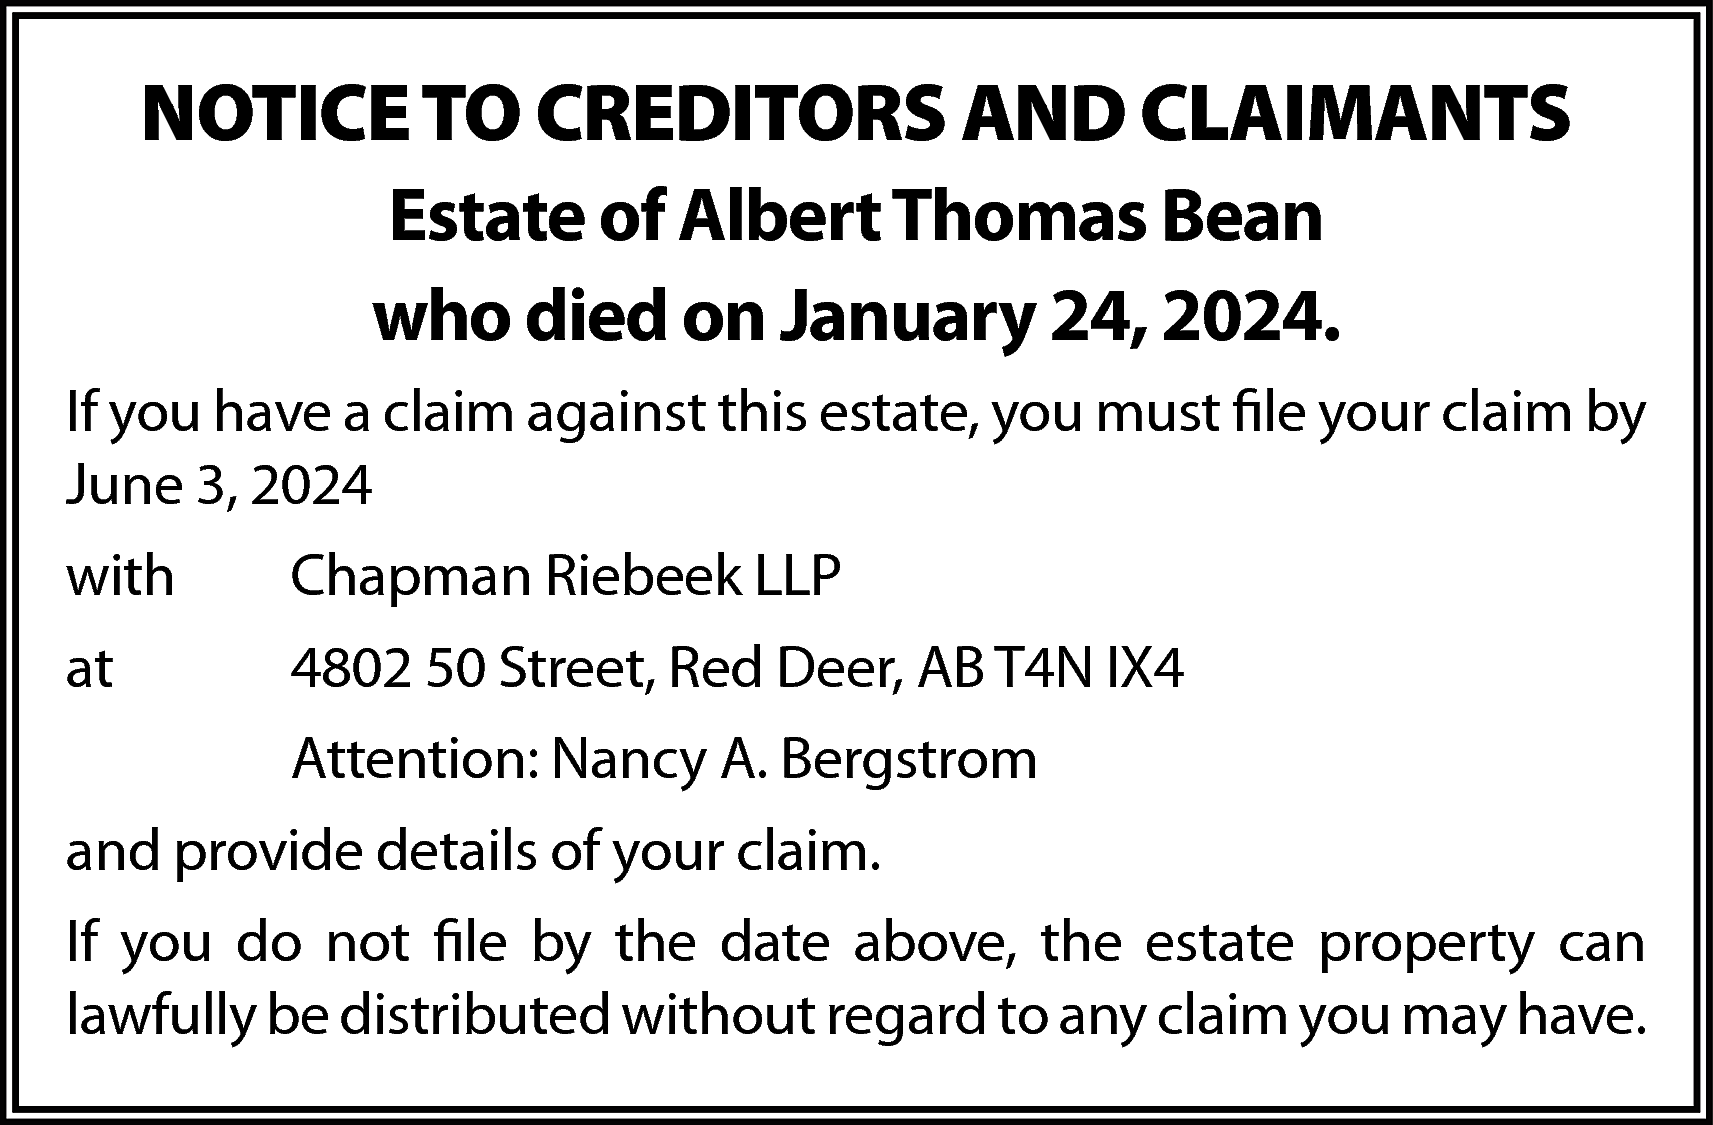 NOTICE TO CREDITORS AND CLAIMANTS  NOTICE TO CREDITORS AND CLAIMANTS  Estate of Albert Thomas Bean  who died on January 24, 2024.  If you have a claim against this estate, you must file your claim by  June 3, 2024  with    Chapman Riebeek LLP    at    4802 50 Street, Red Deer, AB T4N IX4  Attention: Nancy A. Bergstrom    and provide details of your claim.  If you do not file by the date above, the estate property can  lawfully be distributed without regard to any claim you may have.    